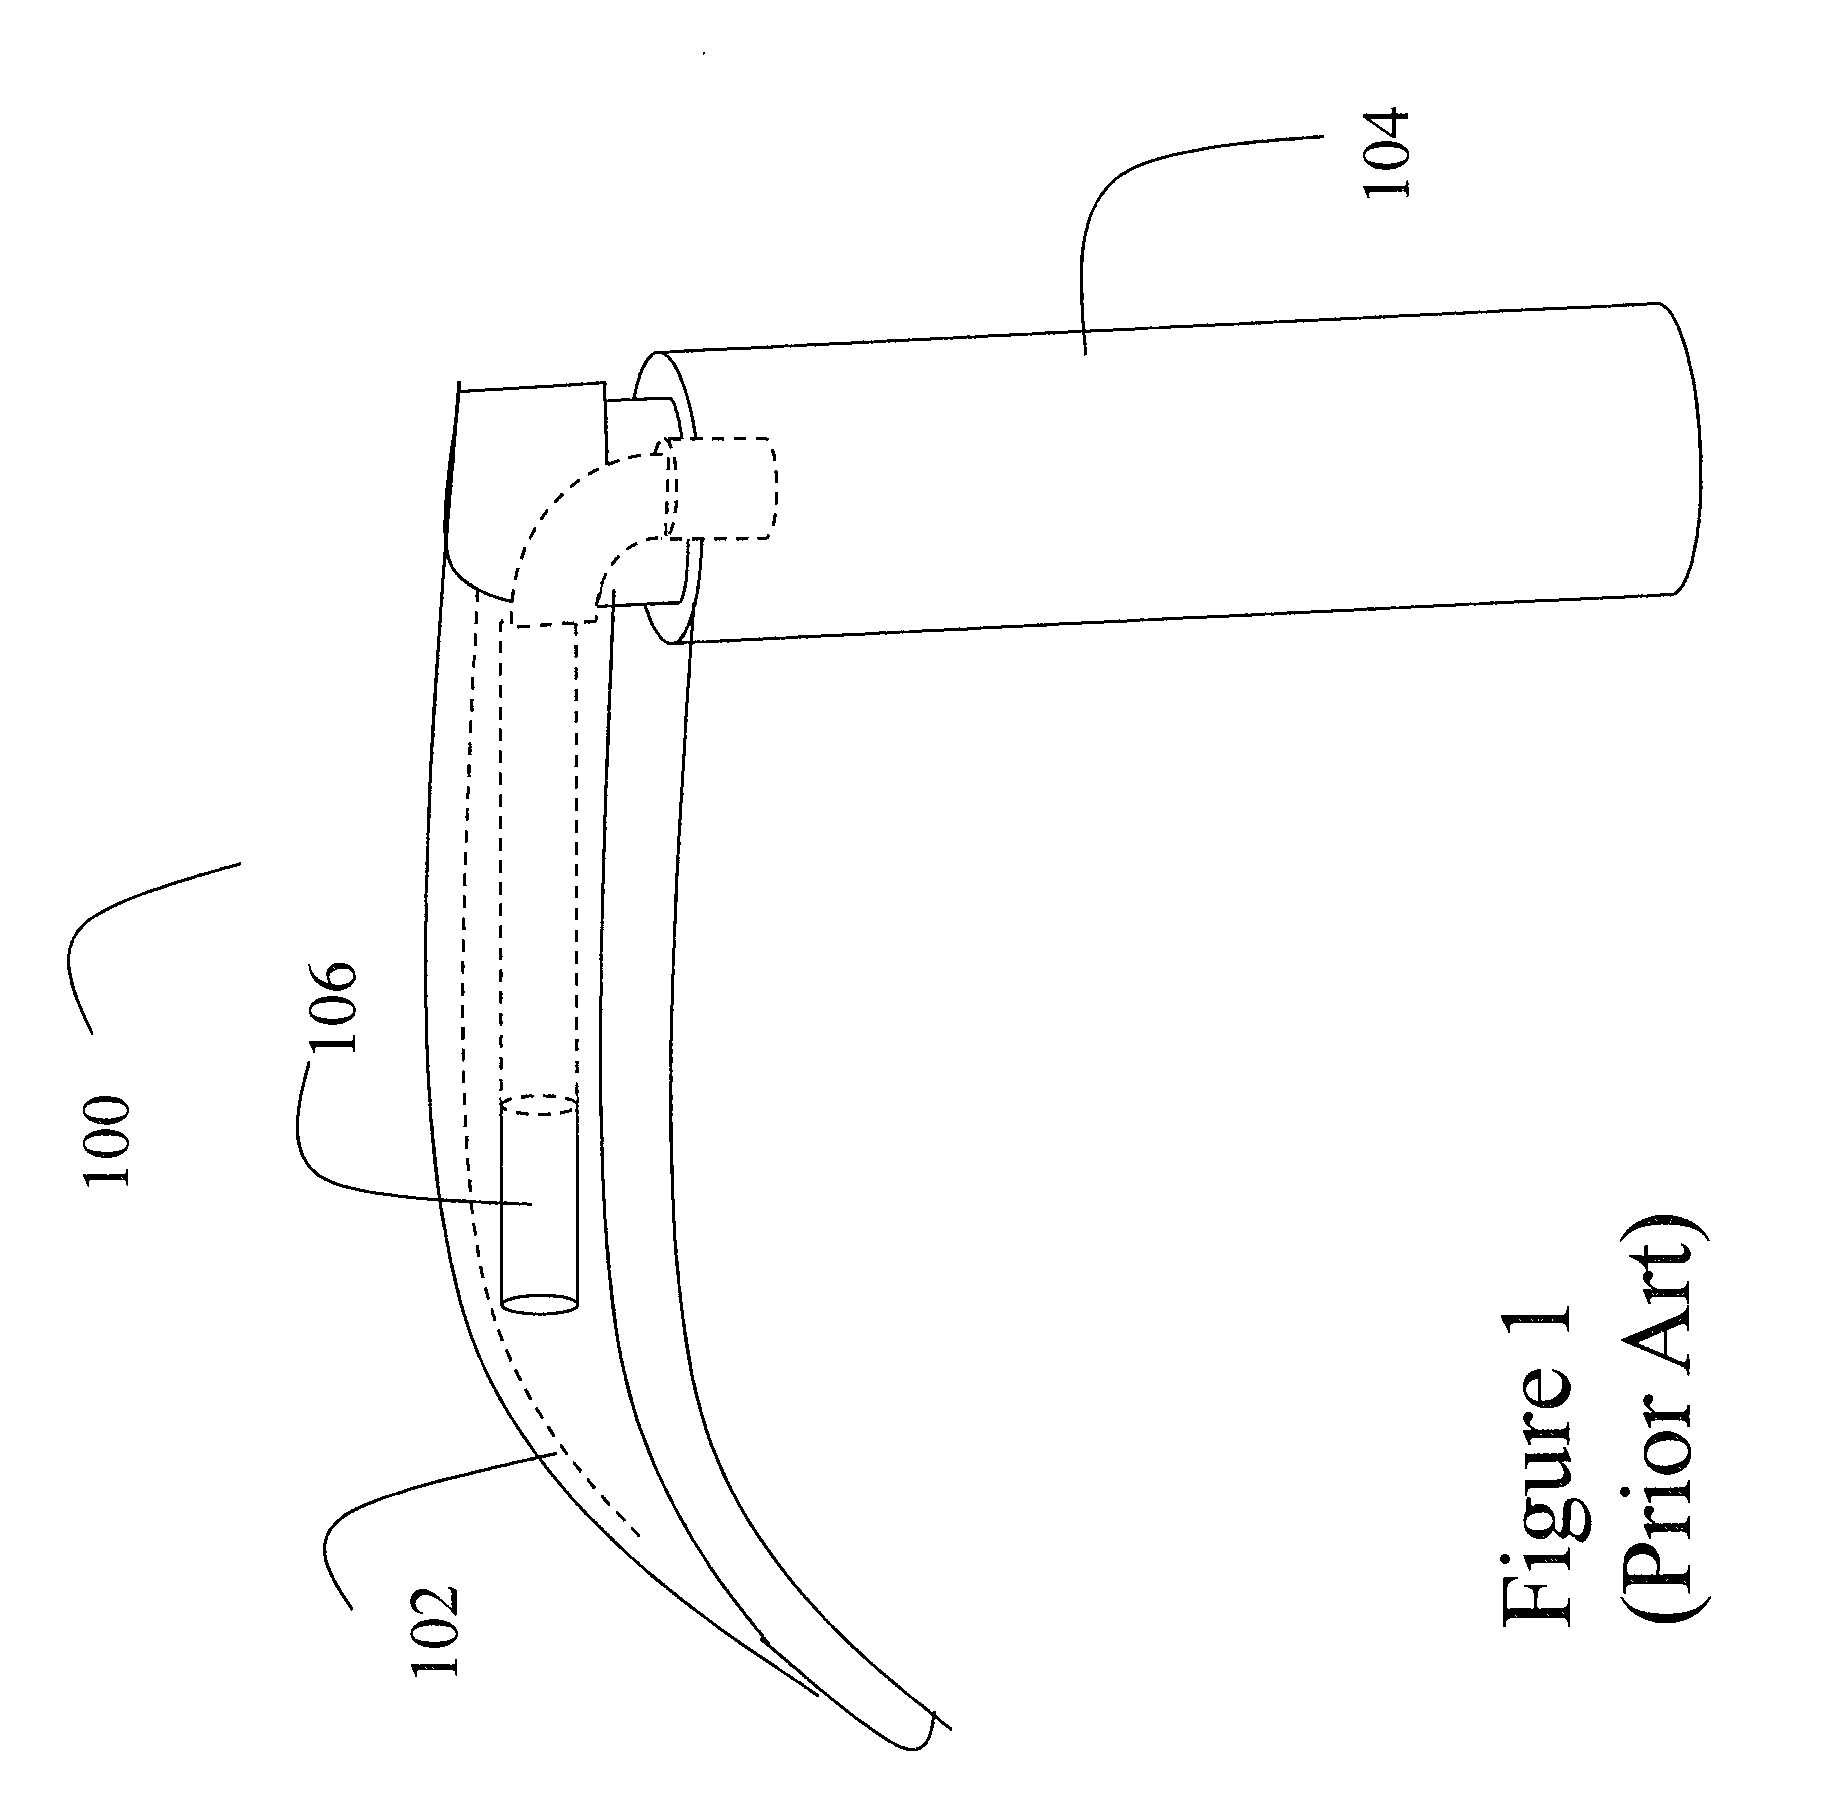 Disposable endoscopic access device and portable display